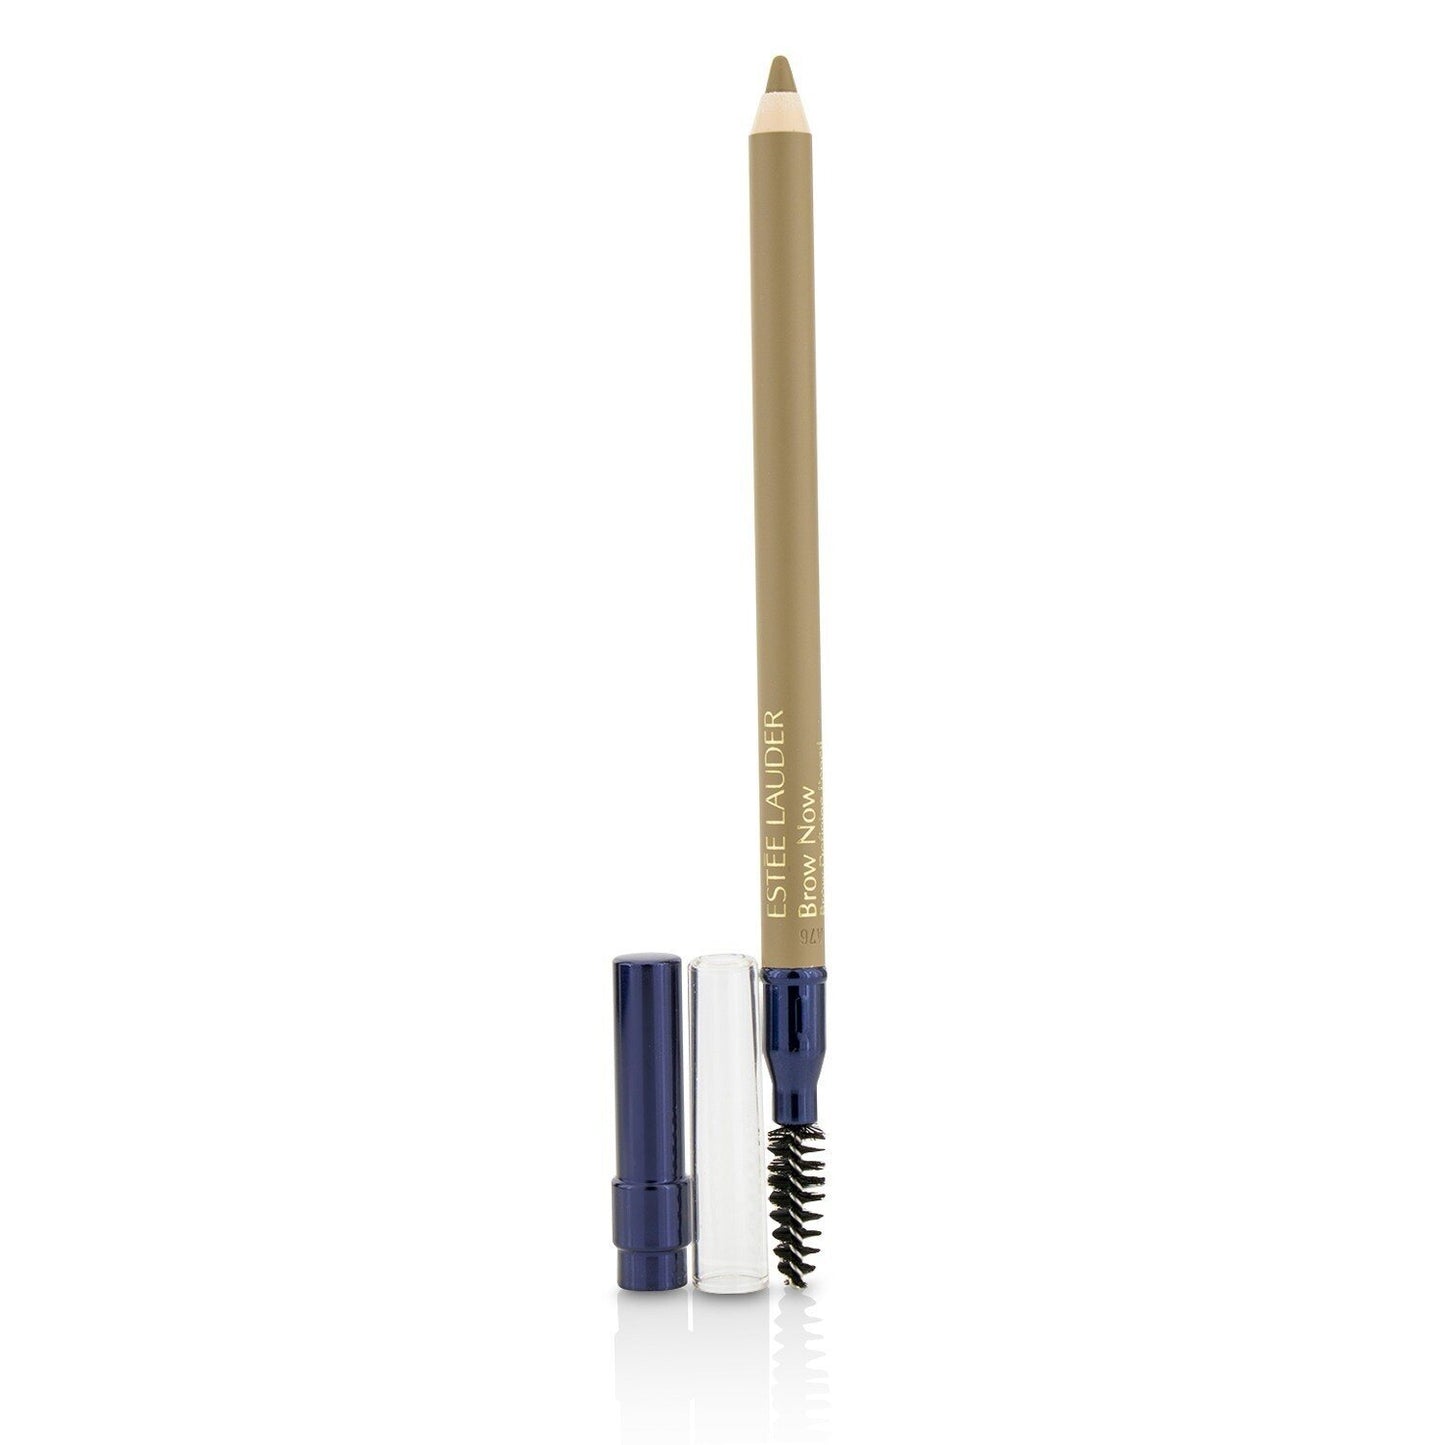 Brow Now Brow Defining Pencil - # 01 Blonde